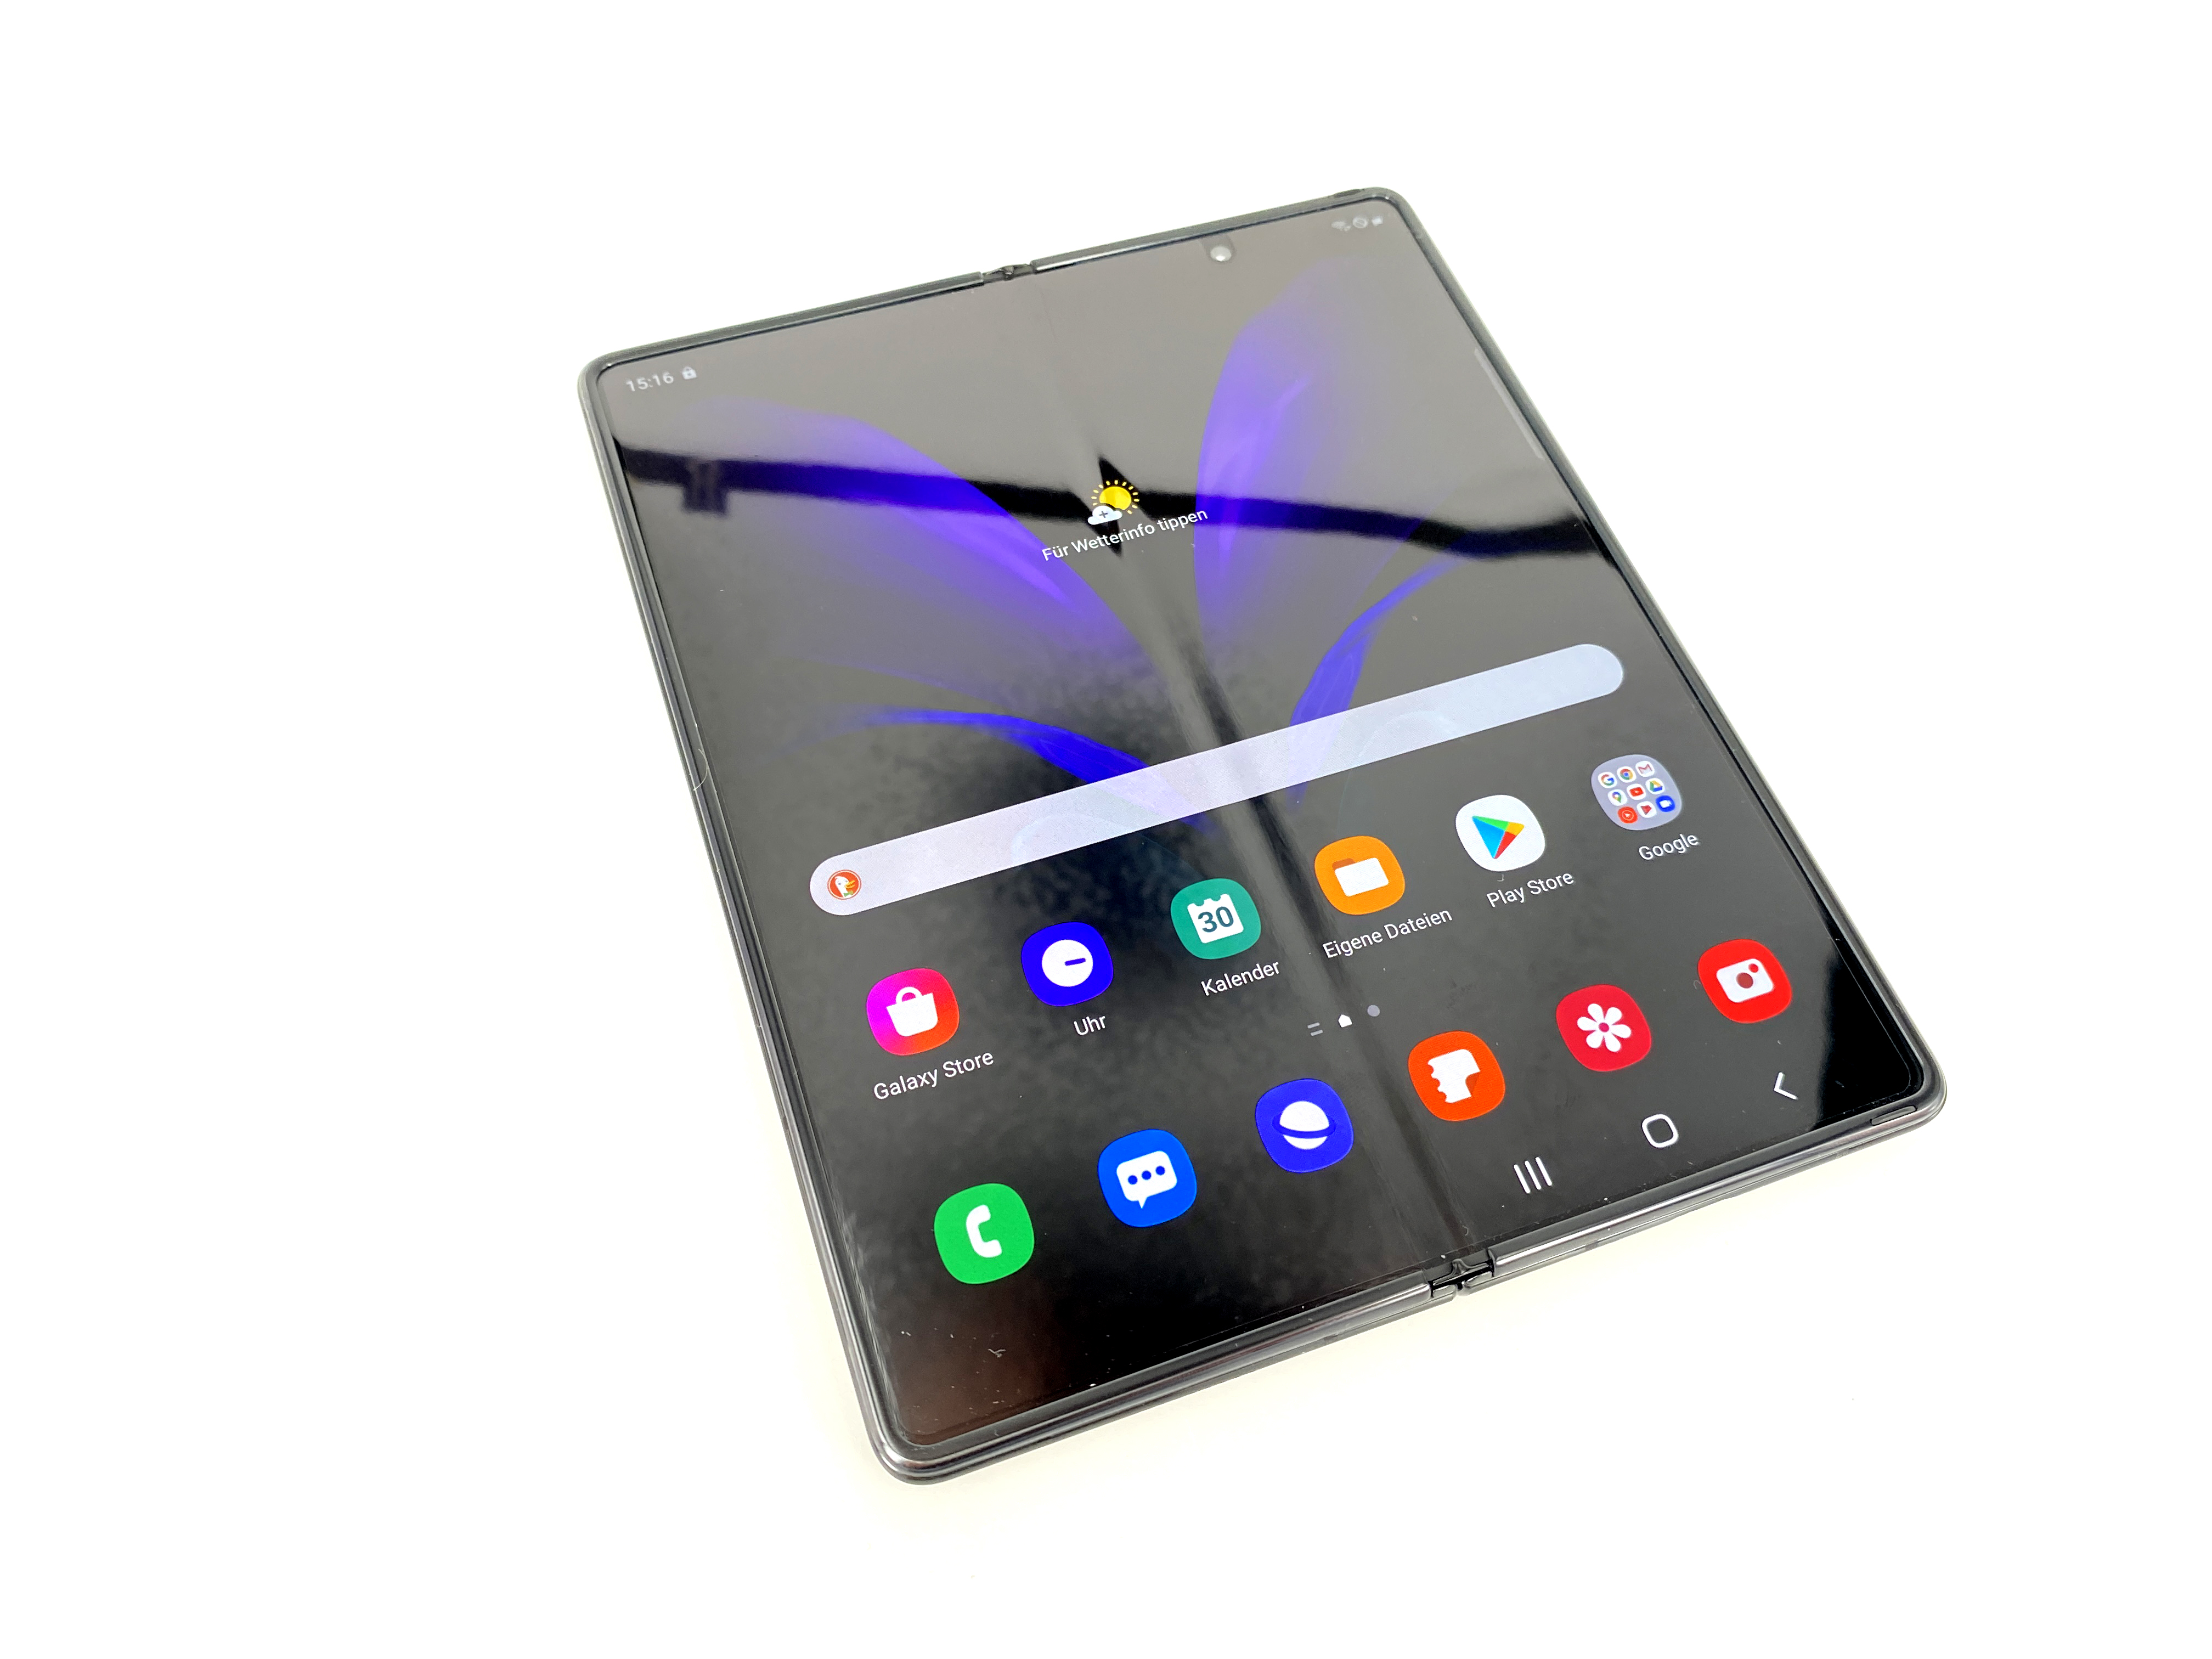 Samsung Galaxy Z Fold2 5g Smartphone Review A Great And Expensive Foldable Phone Notebookcheck Net Reviews